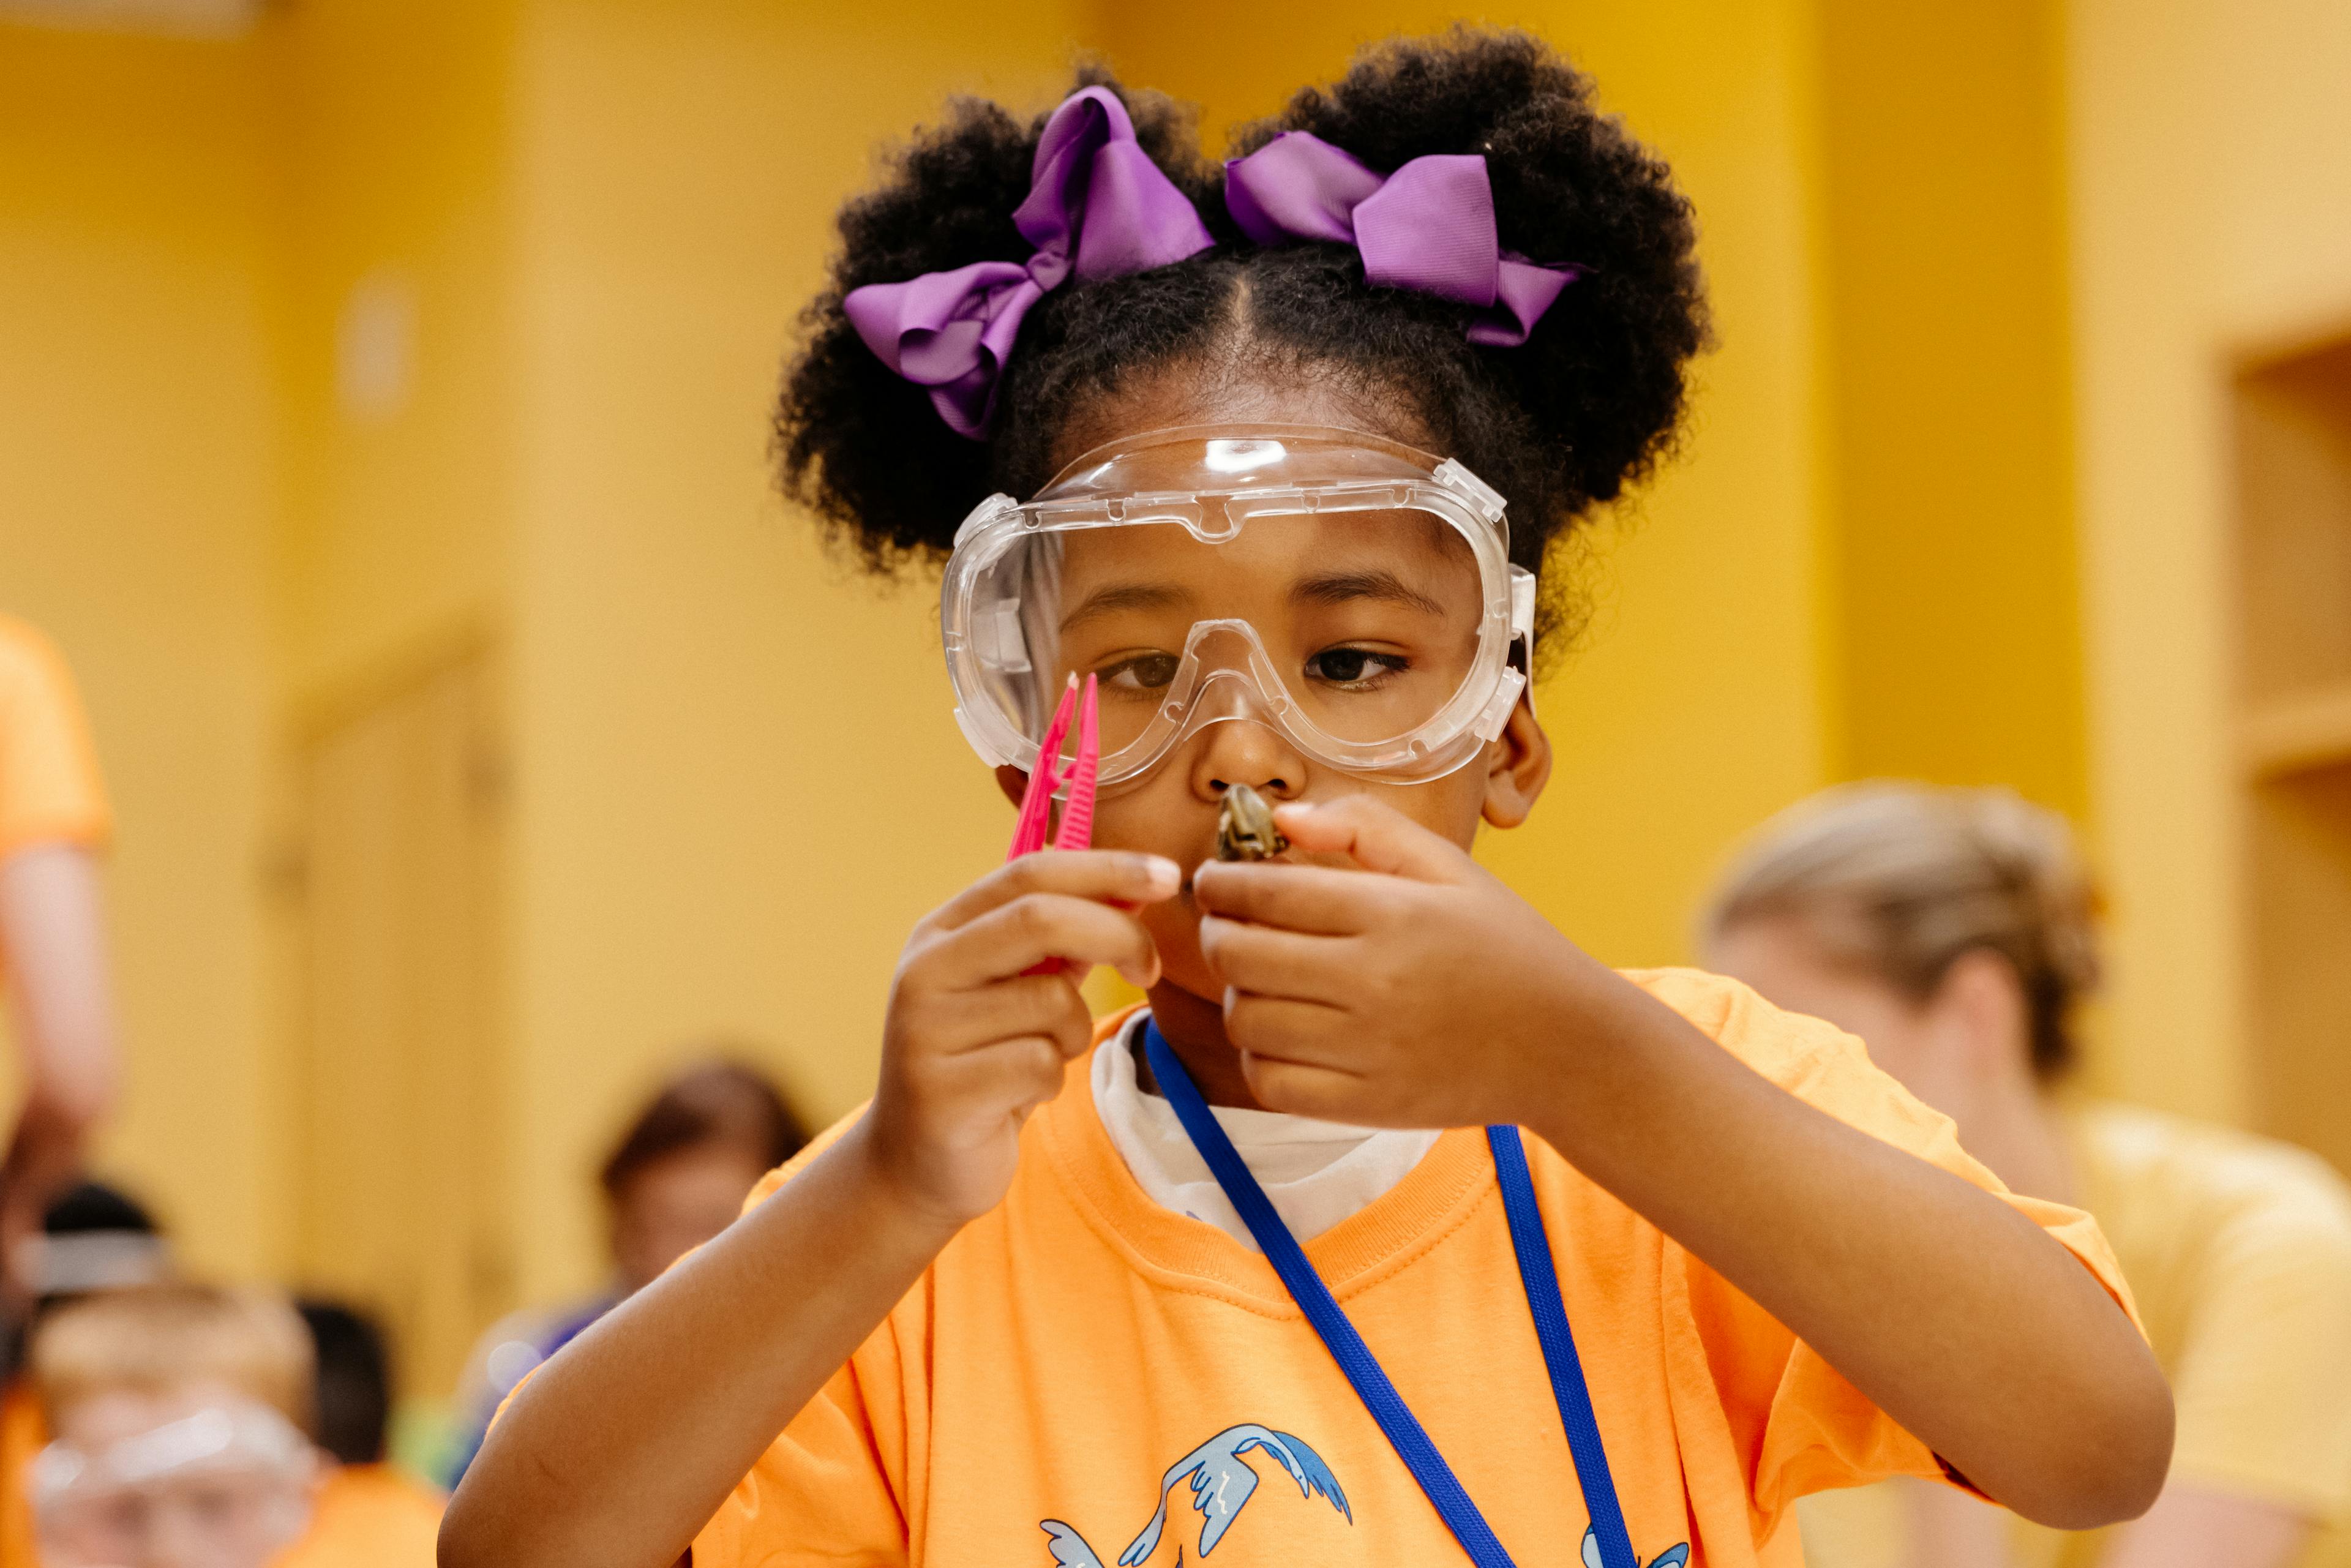 A young child with two buns and purple bows, wearing safety goggles.  The child is holding plastic tweezers and an object that they are holding up looking at through the goggles.